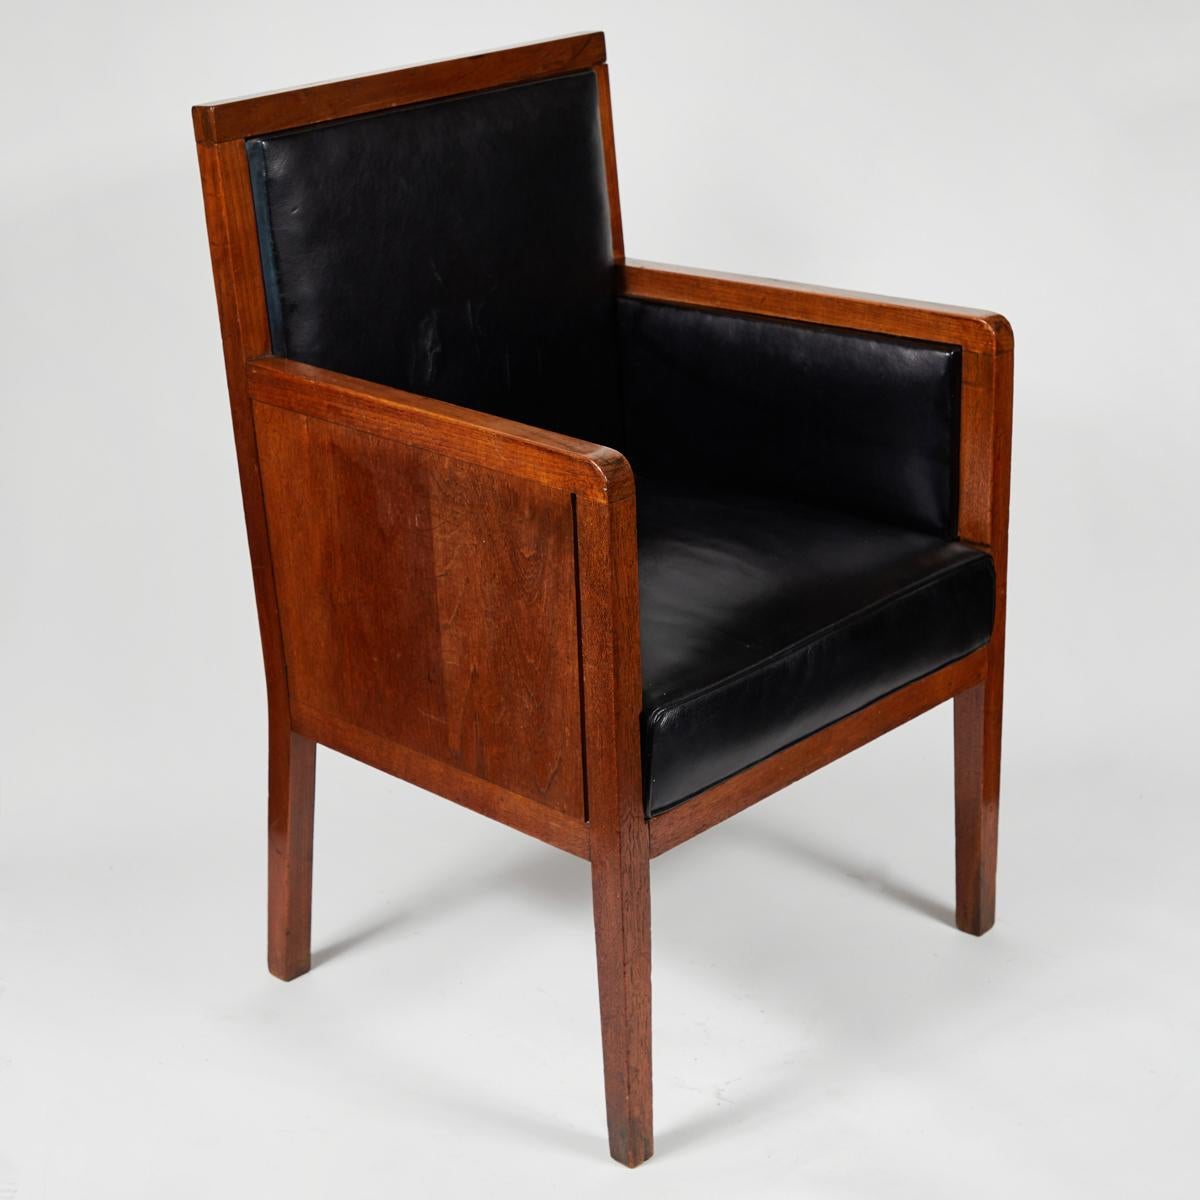 Art Deco wooden armchair upholstered in blue leather from France.